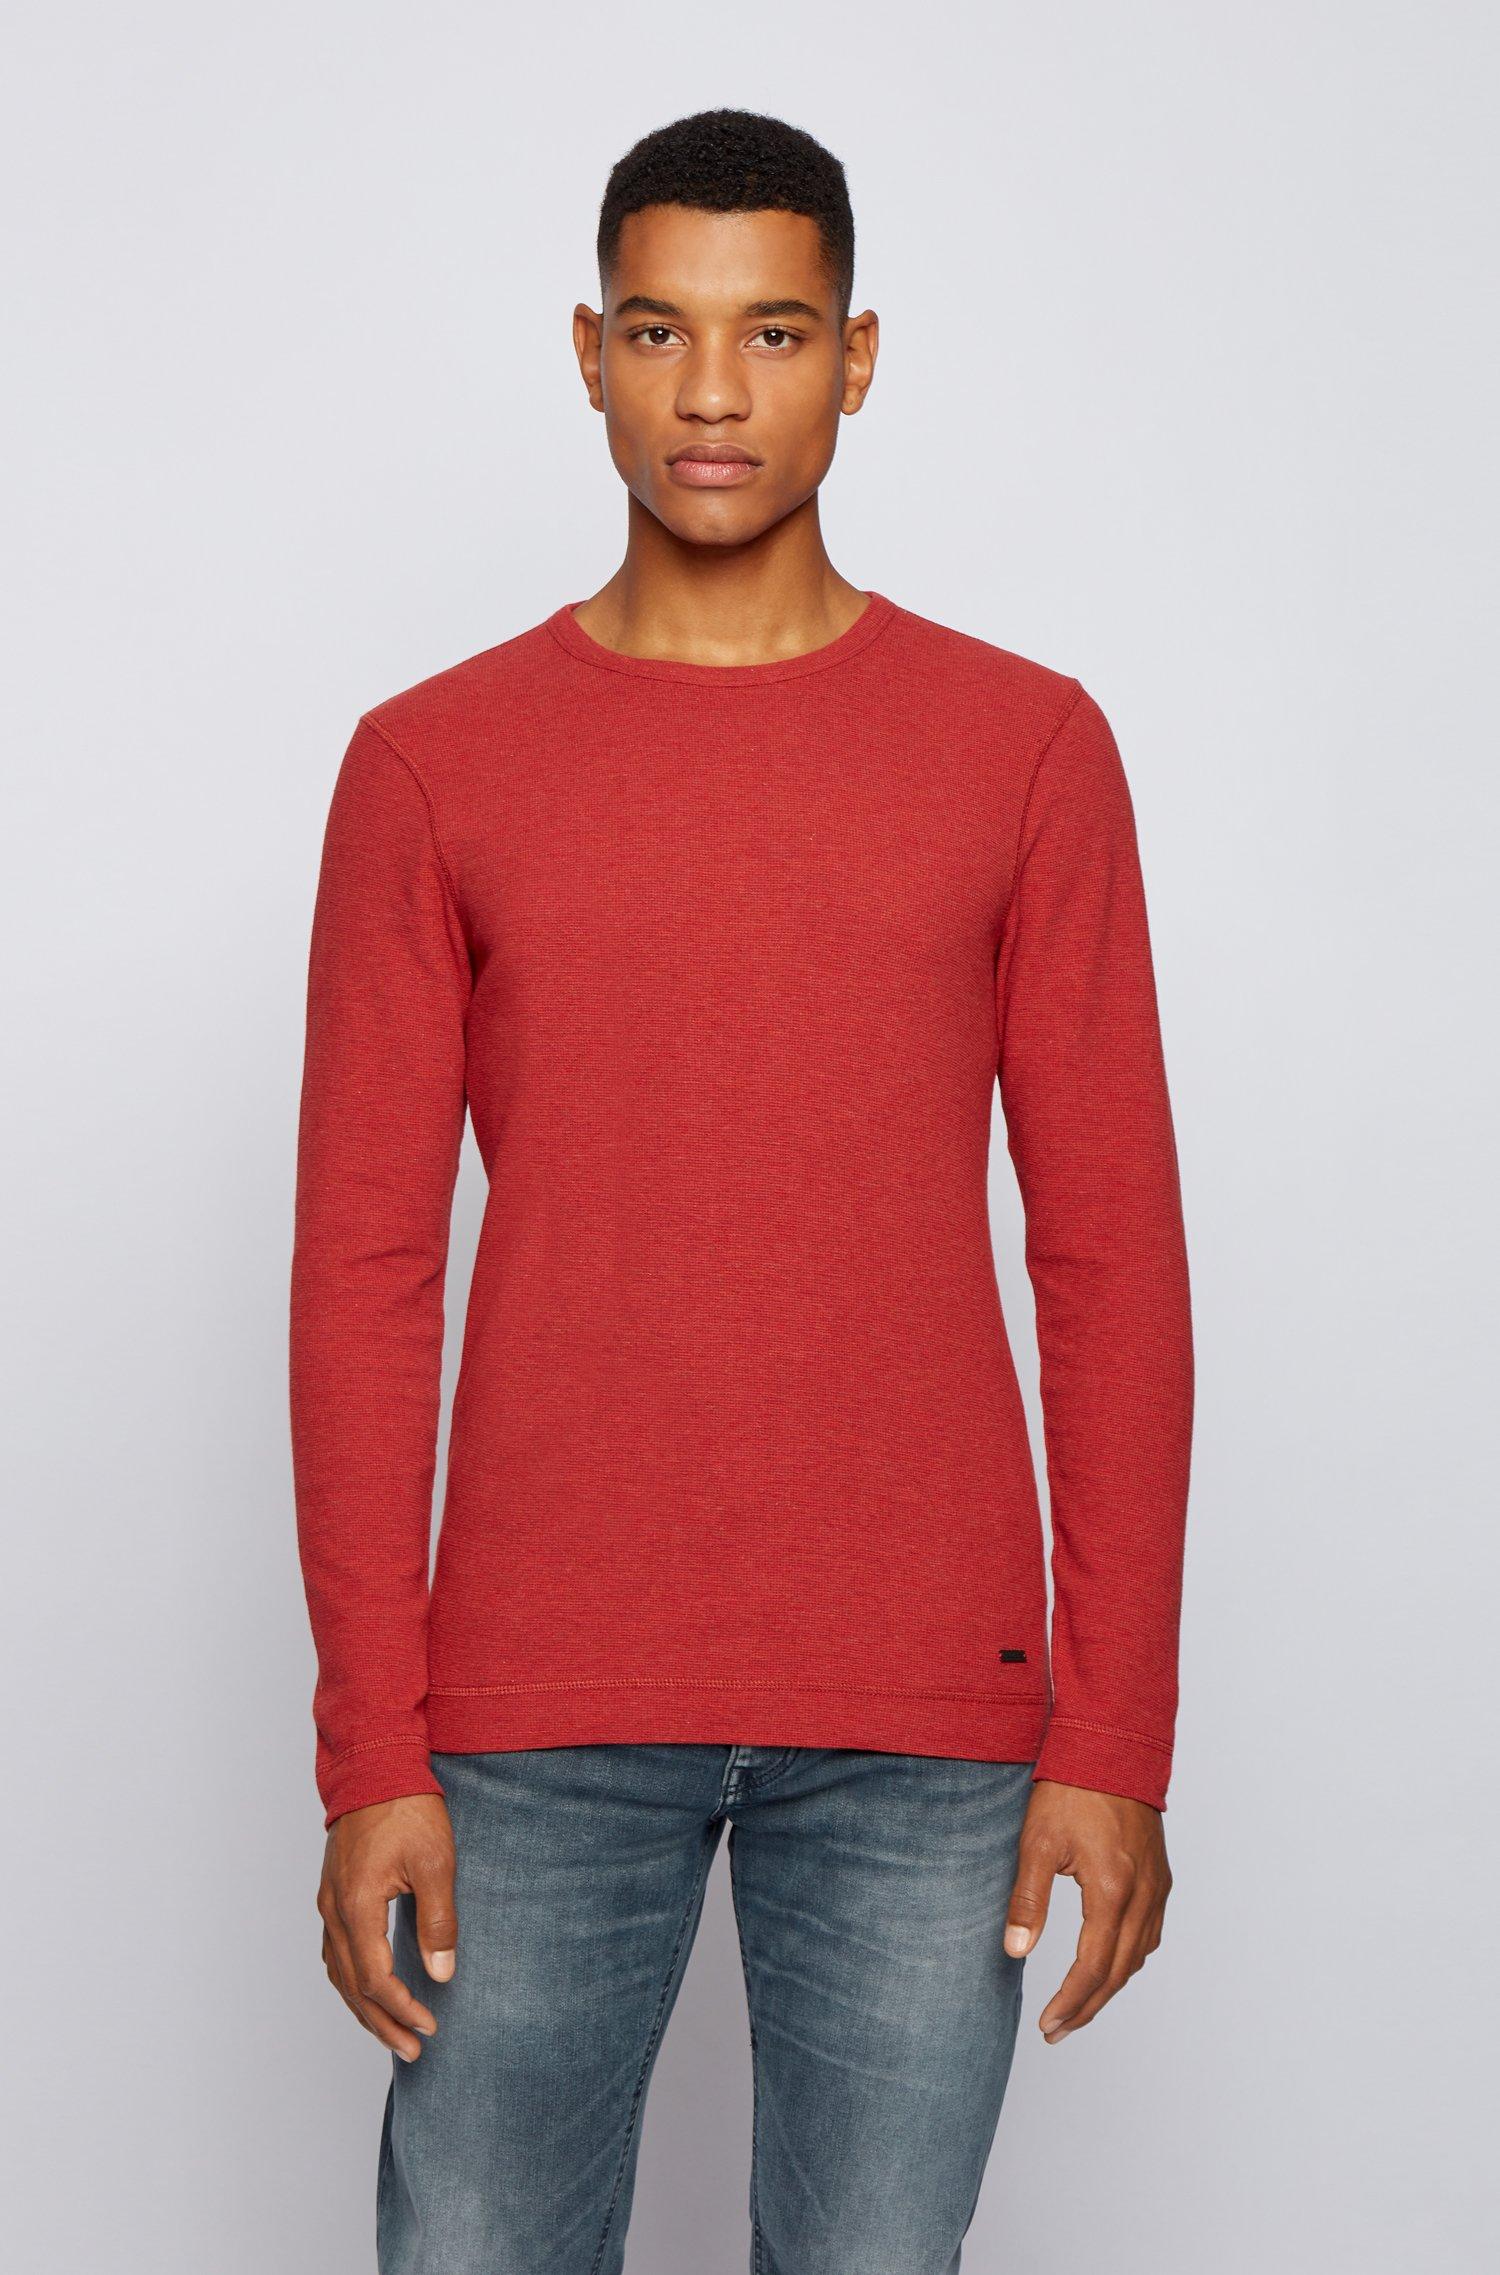 BOSS by HUGO BOSS Slim-fit T-shirt With Long Sleeves In Waffle Cotton in  Red for Men - Lyst